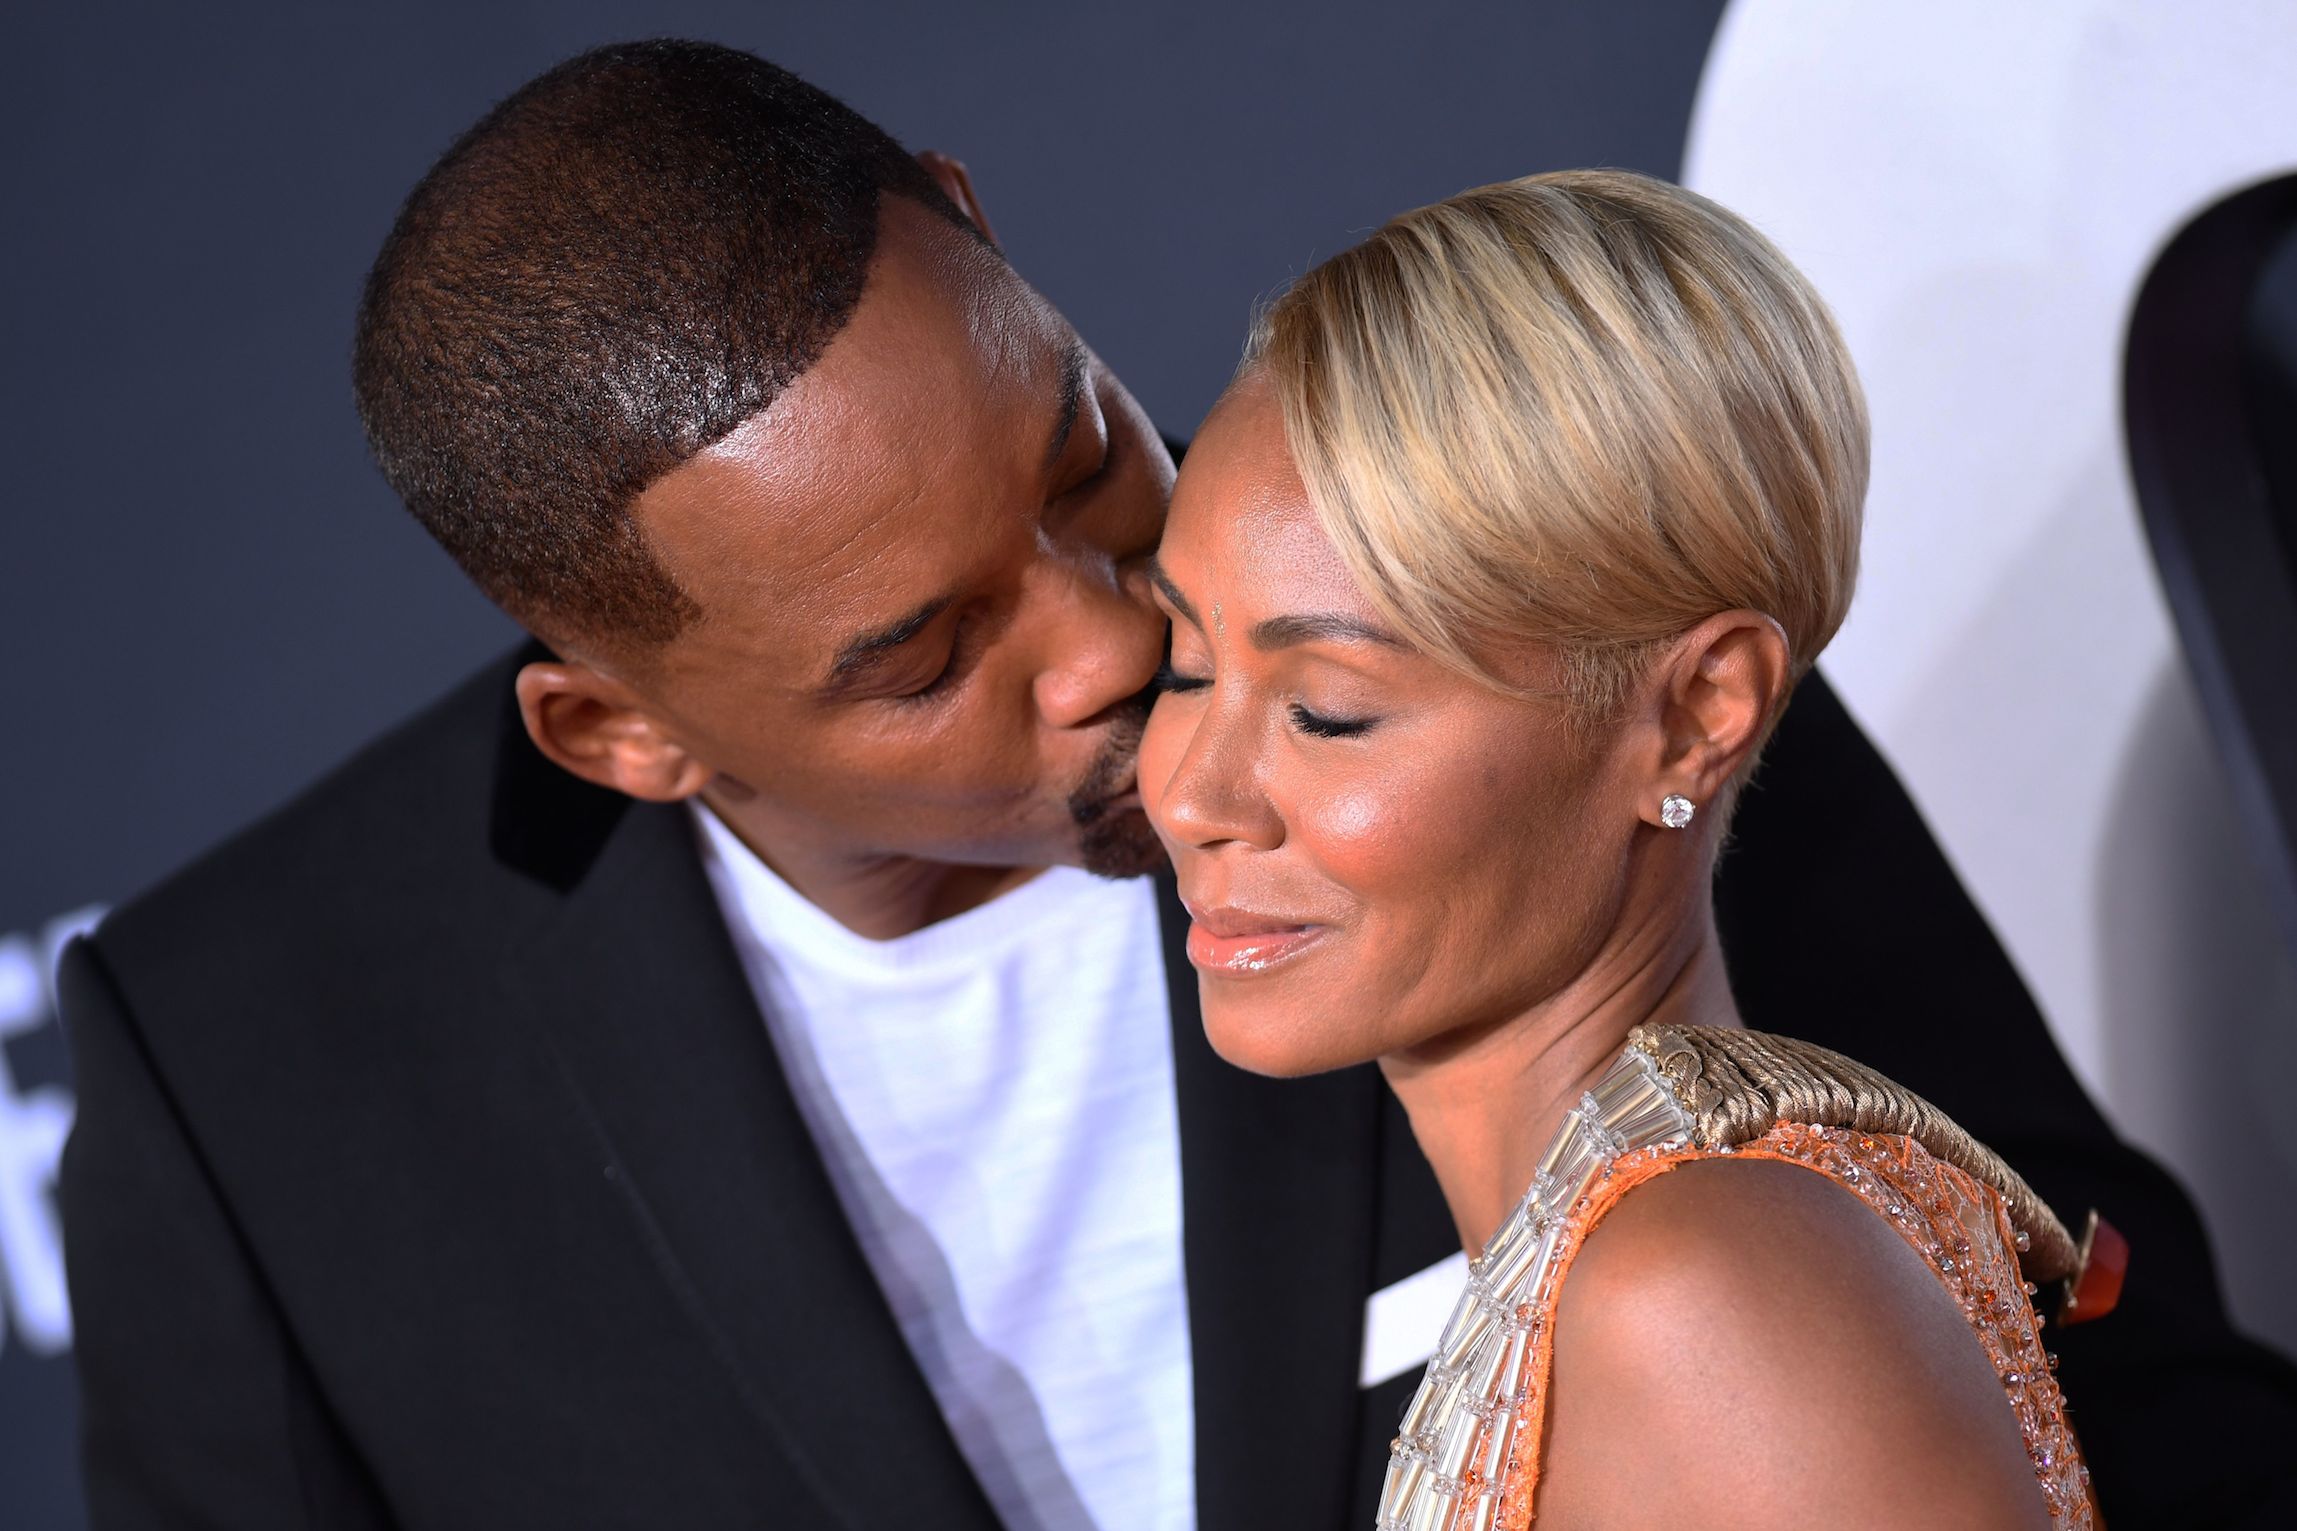 Will Smith (L) kisses Jada Pinkett-Smith as they arrive for the premiere of 'Gemini Man' 